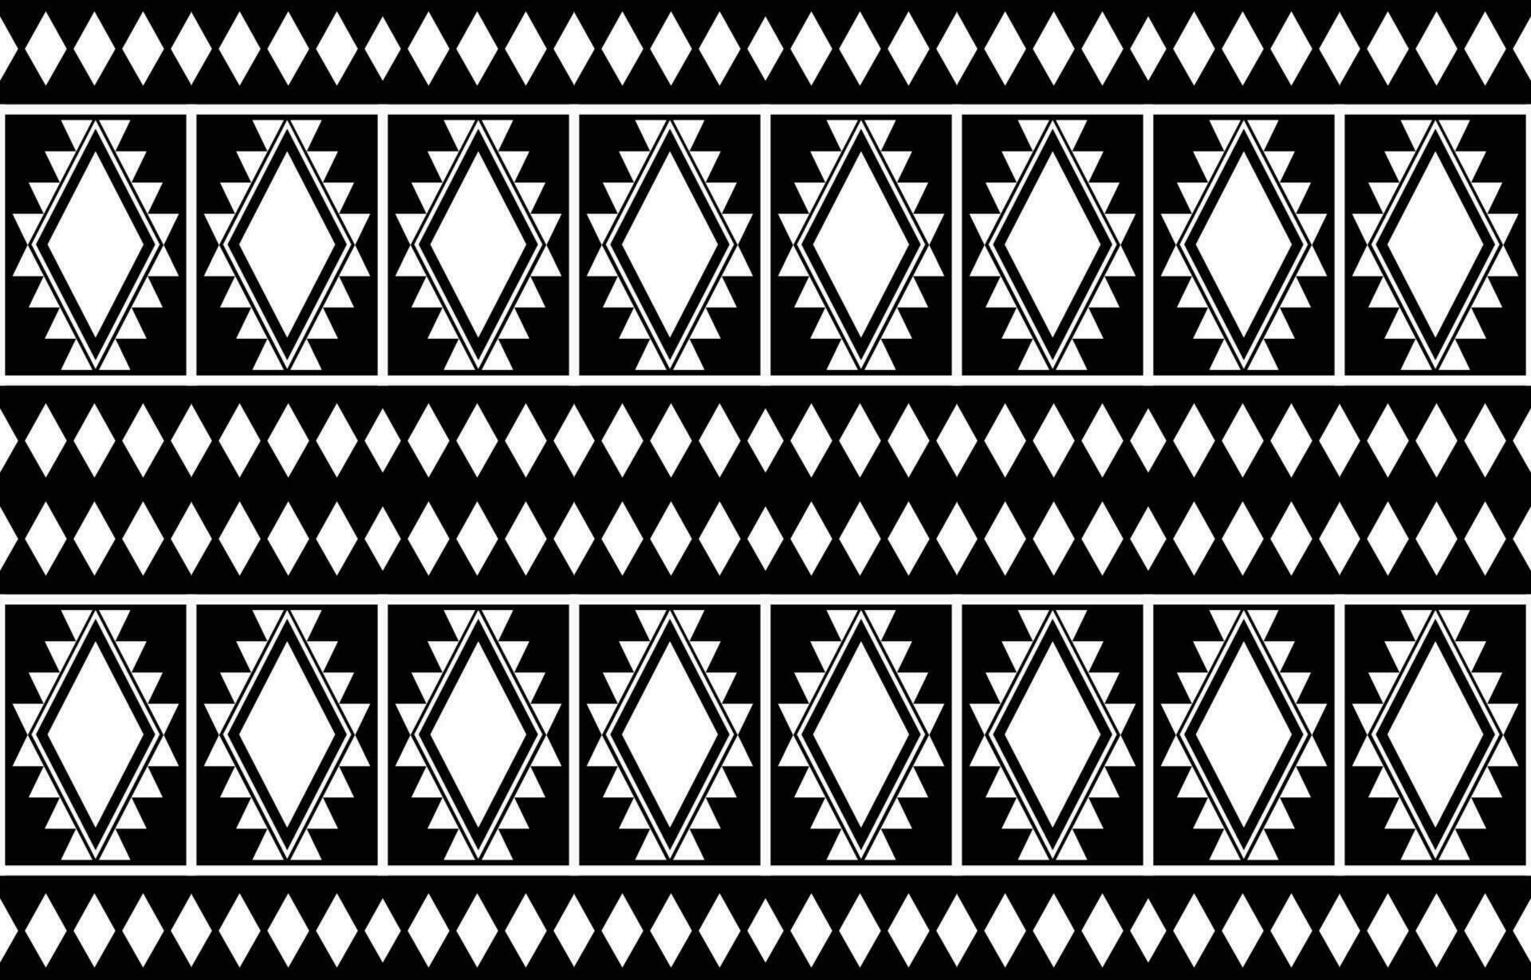 aztec seamless pattern.  rug textile print texture Tribal design, geometric symbols for logo, cards, fabric decorative works. traditional print vector illustration. on black and white background.